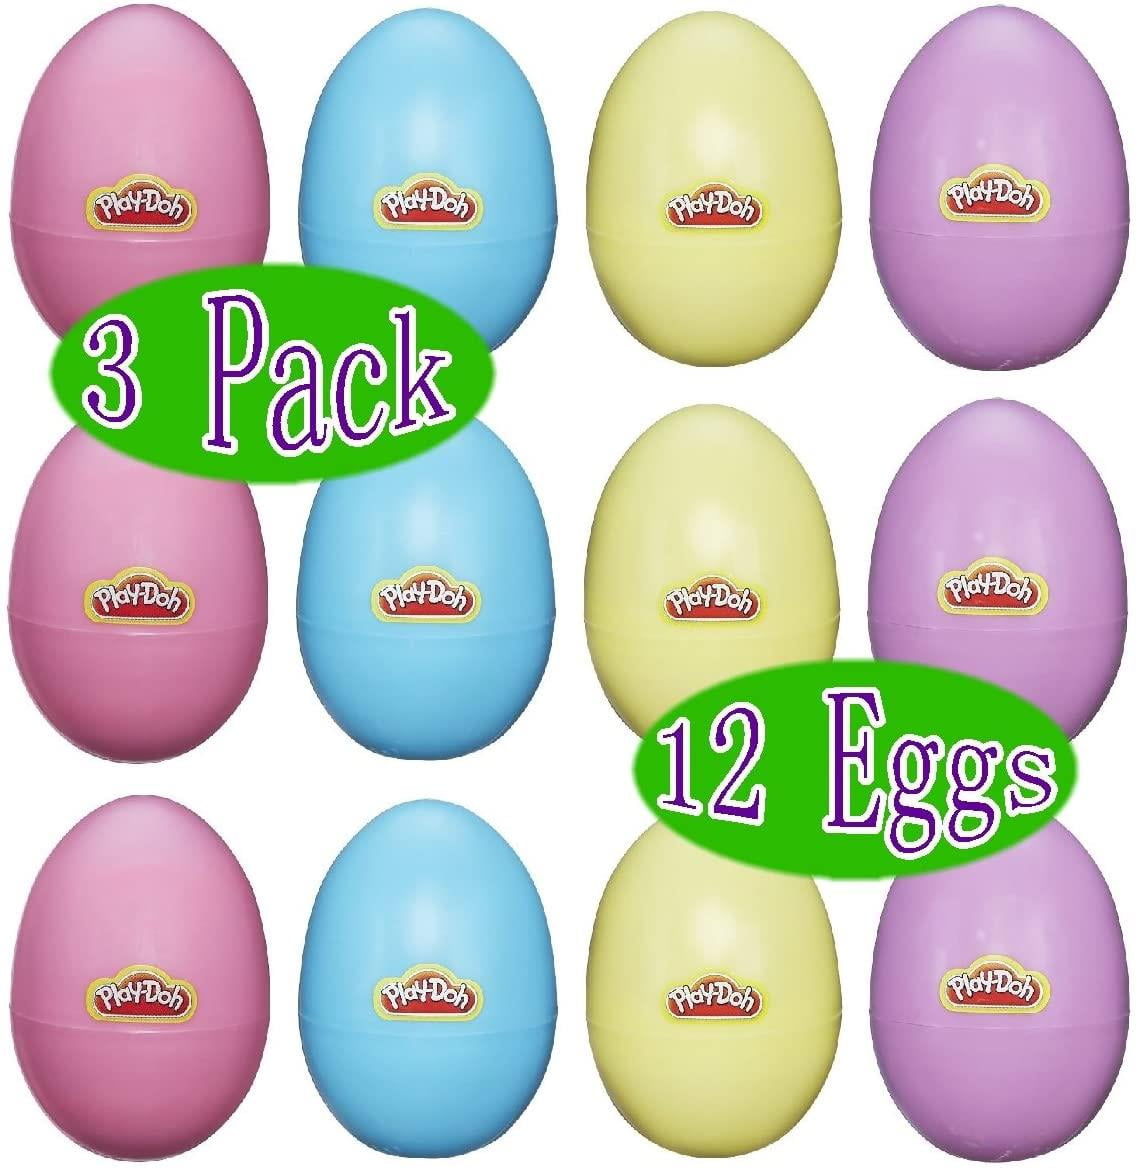 SET OF PLAY-DOG SPRING EGGS PASTEL COLORS PLAY-DOH 4-PACK 